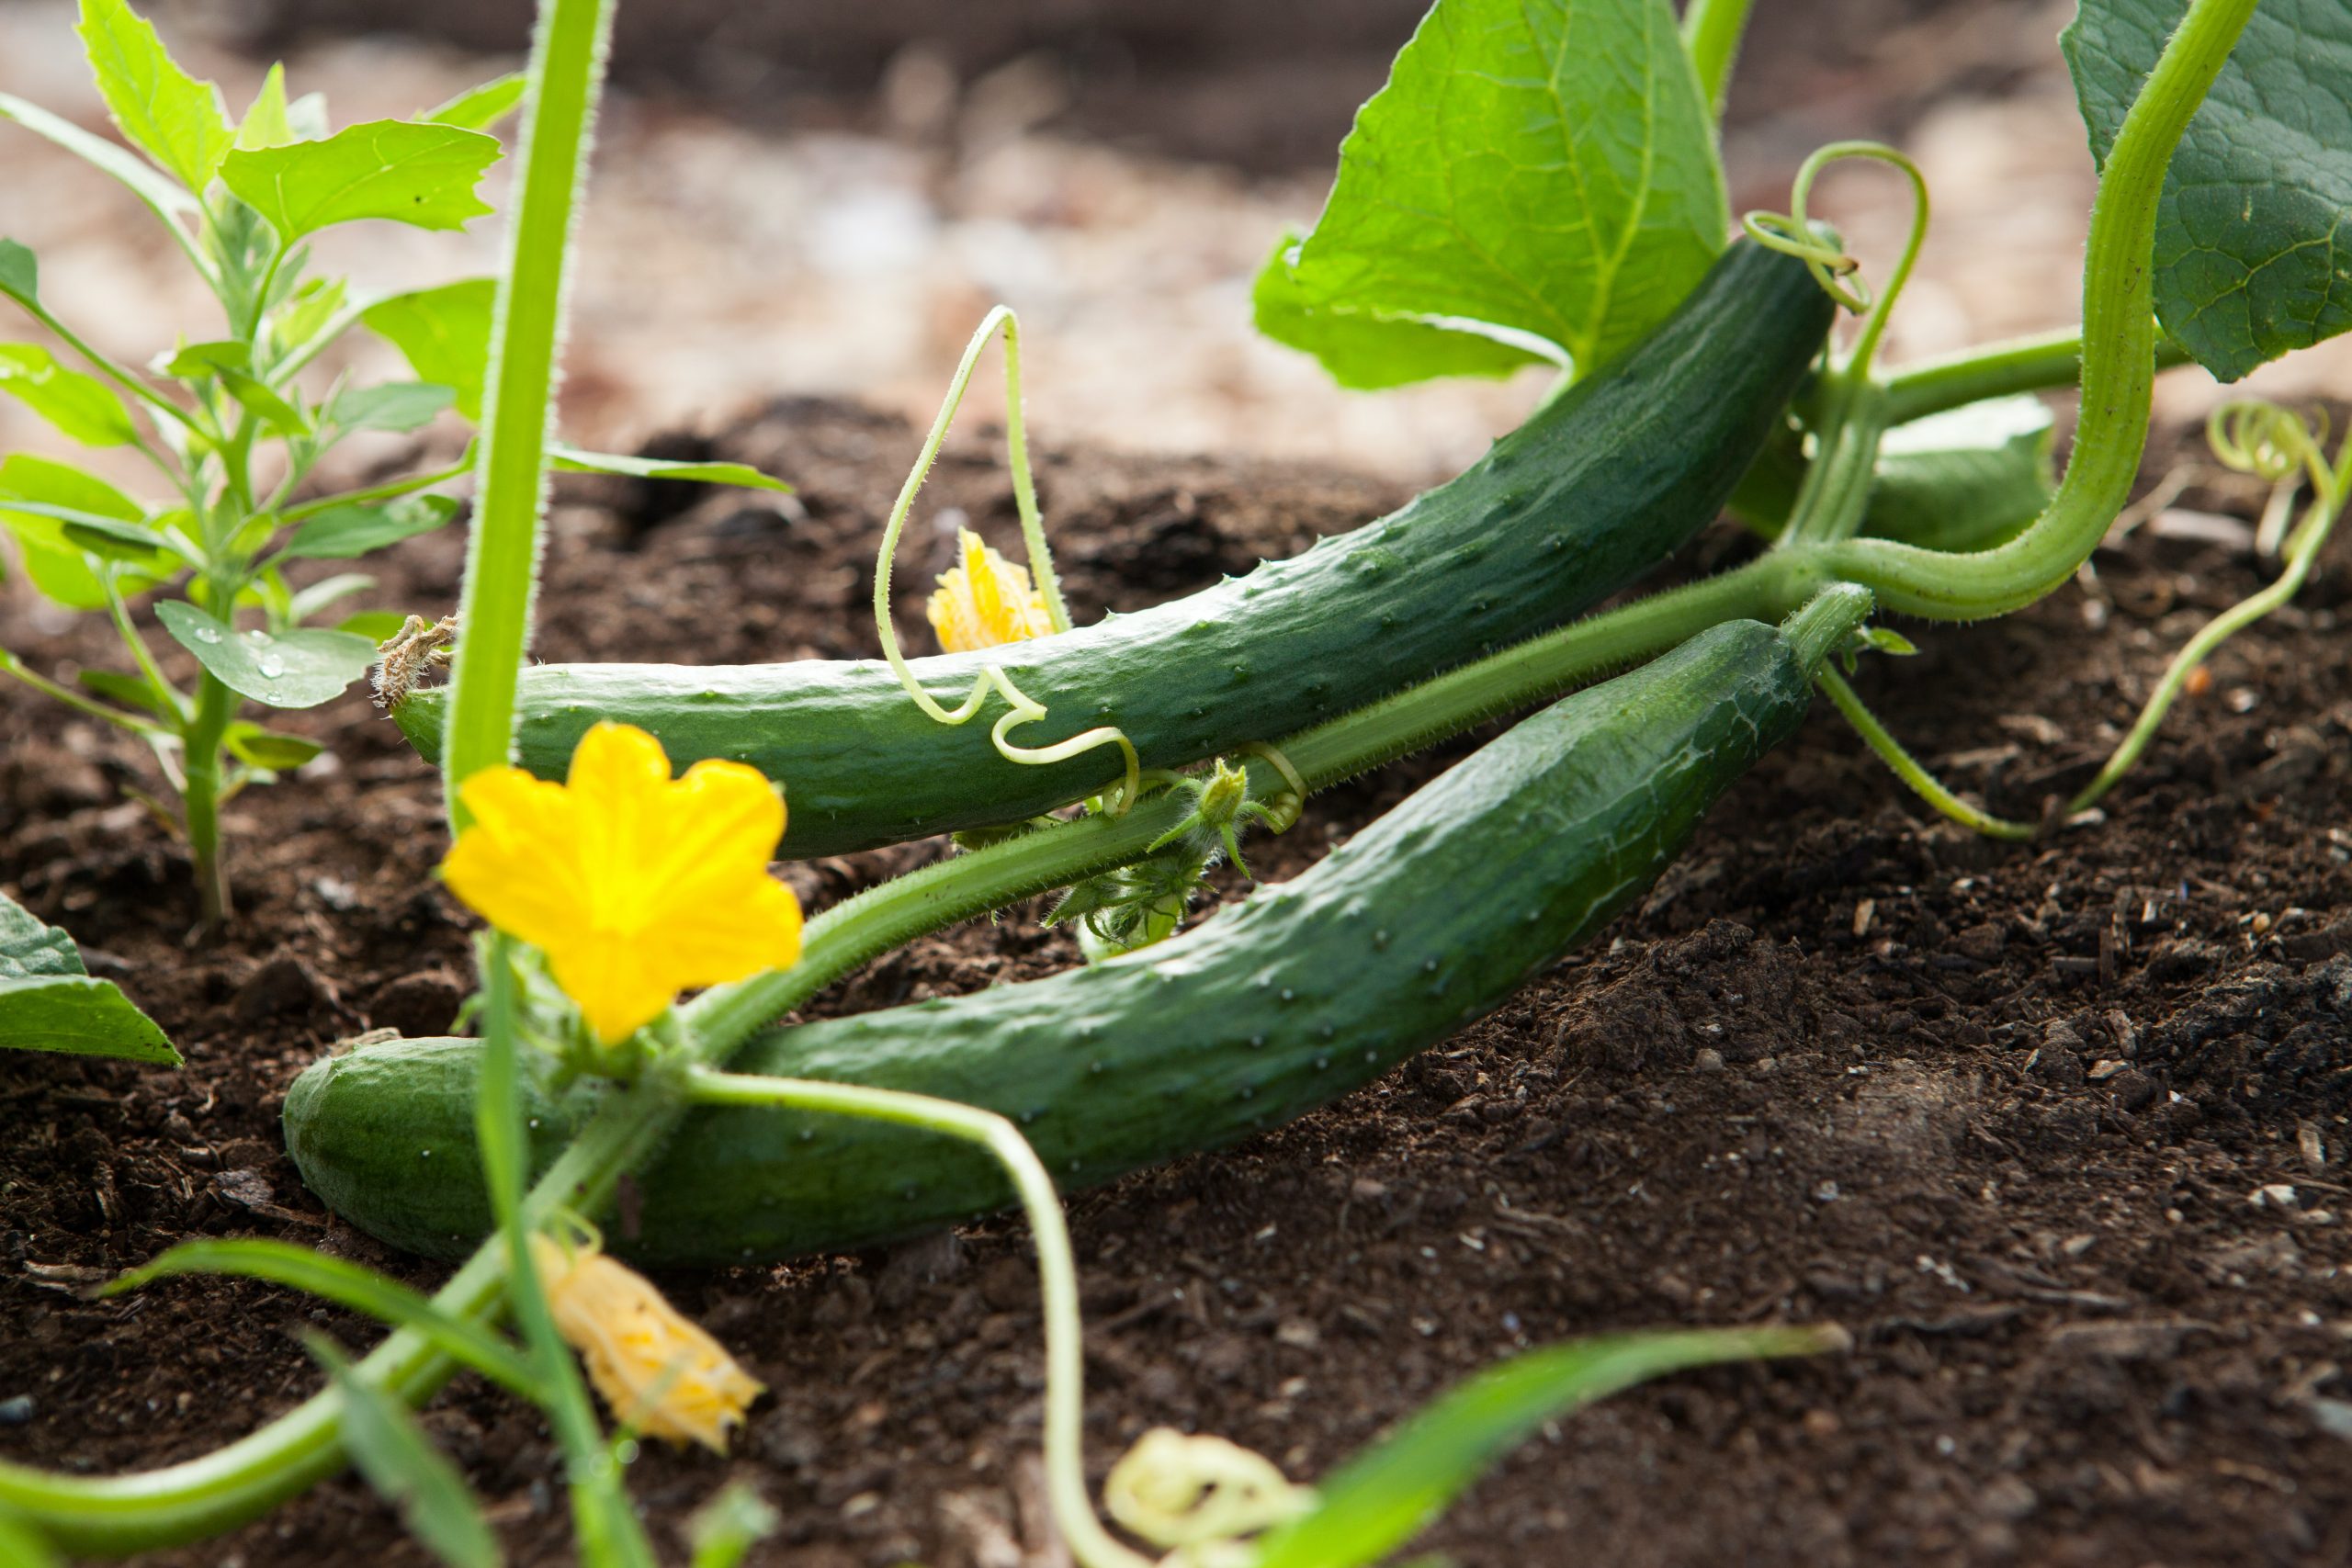 Why Do My Cucumbers Bloom But Don’t Produce?